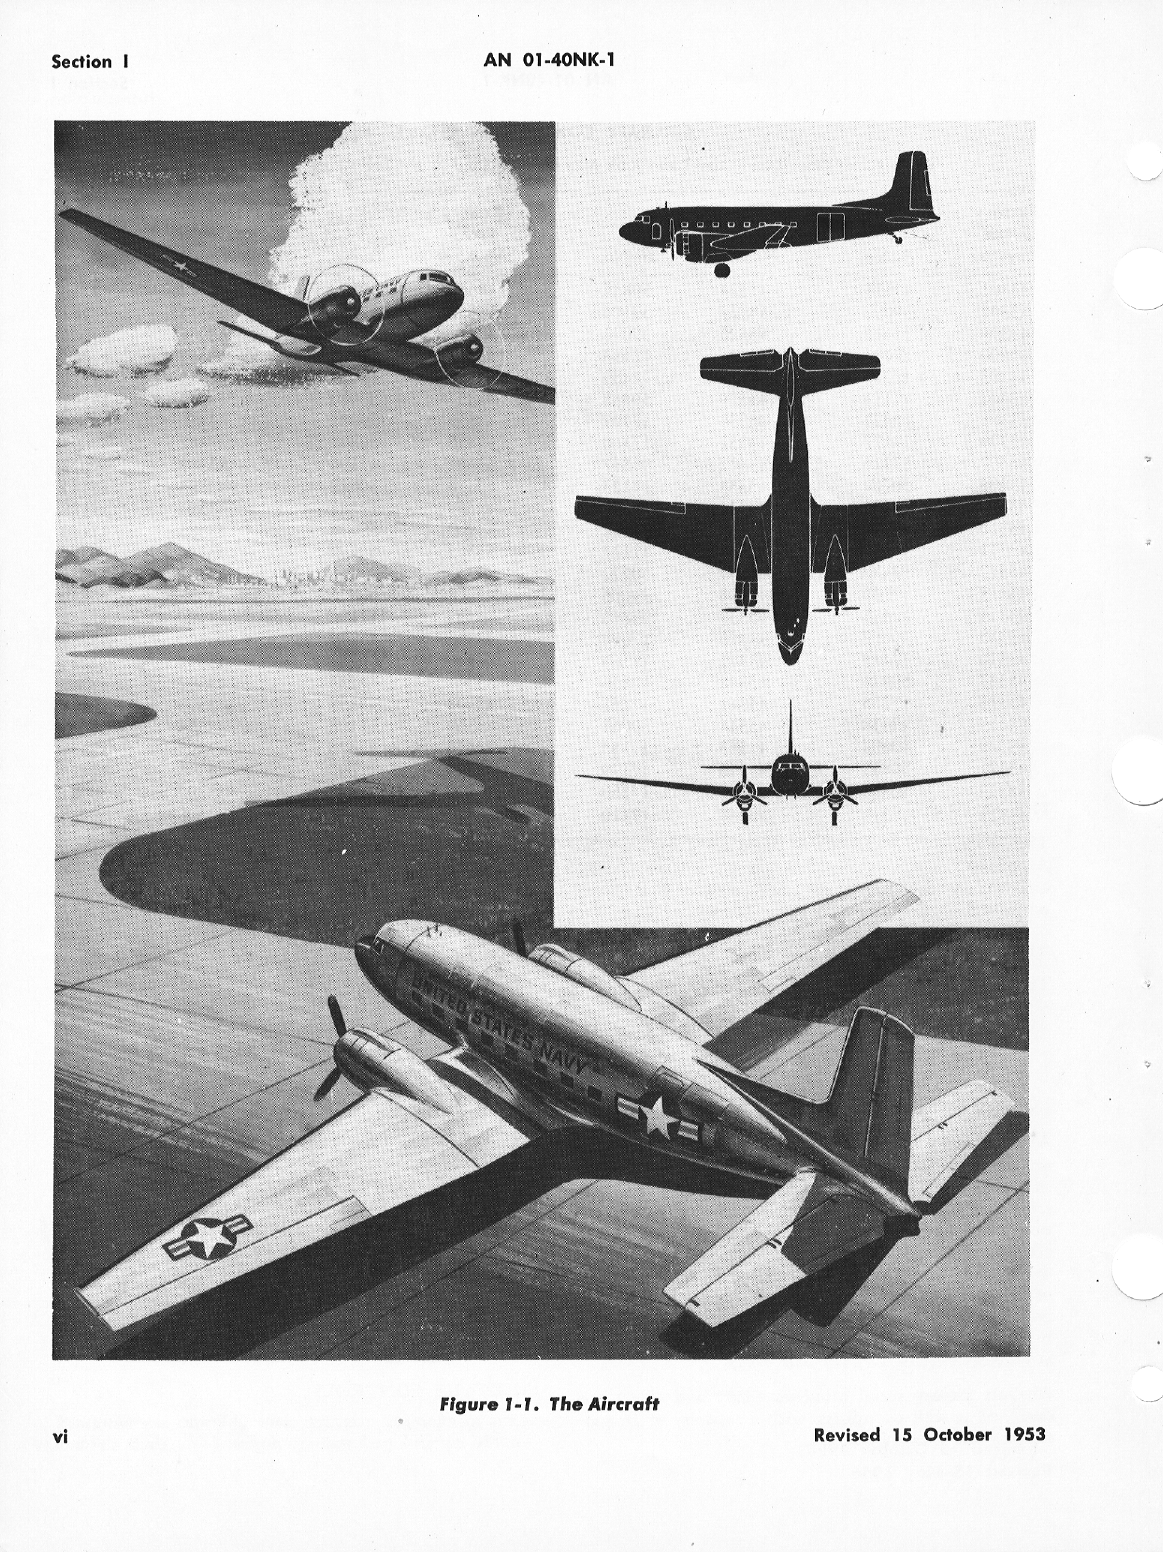 Sample page 26 from AirCorps Library document: Flight Handbook for Navy Model R4D-8 and R4D-8Z Aircraft